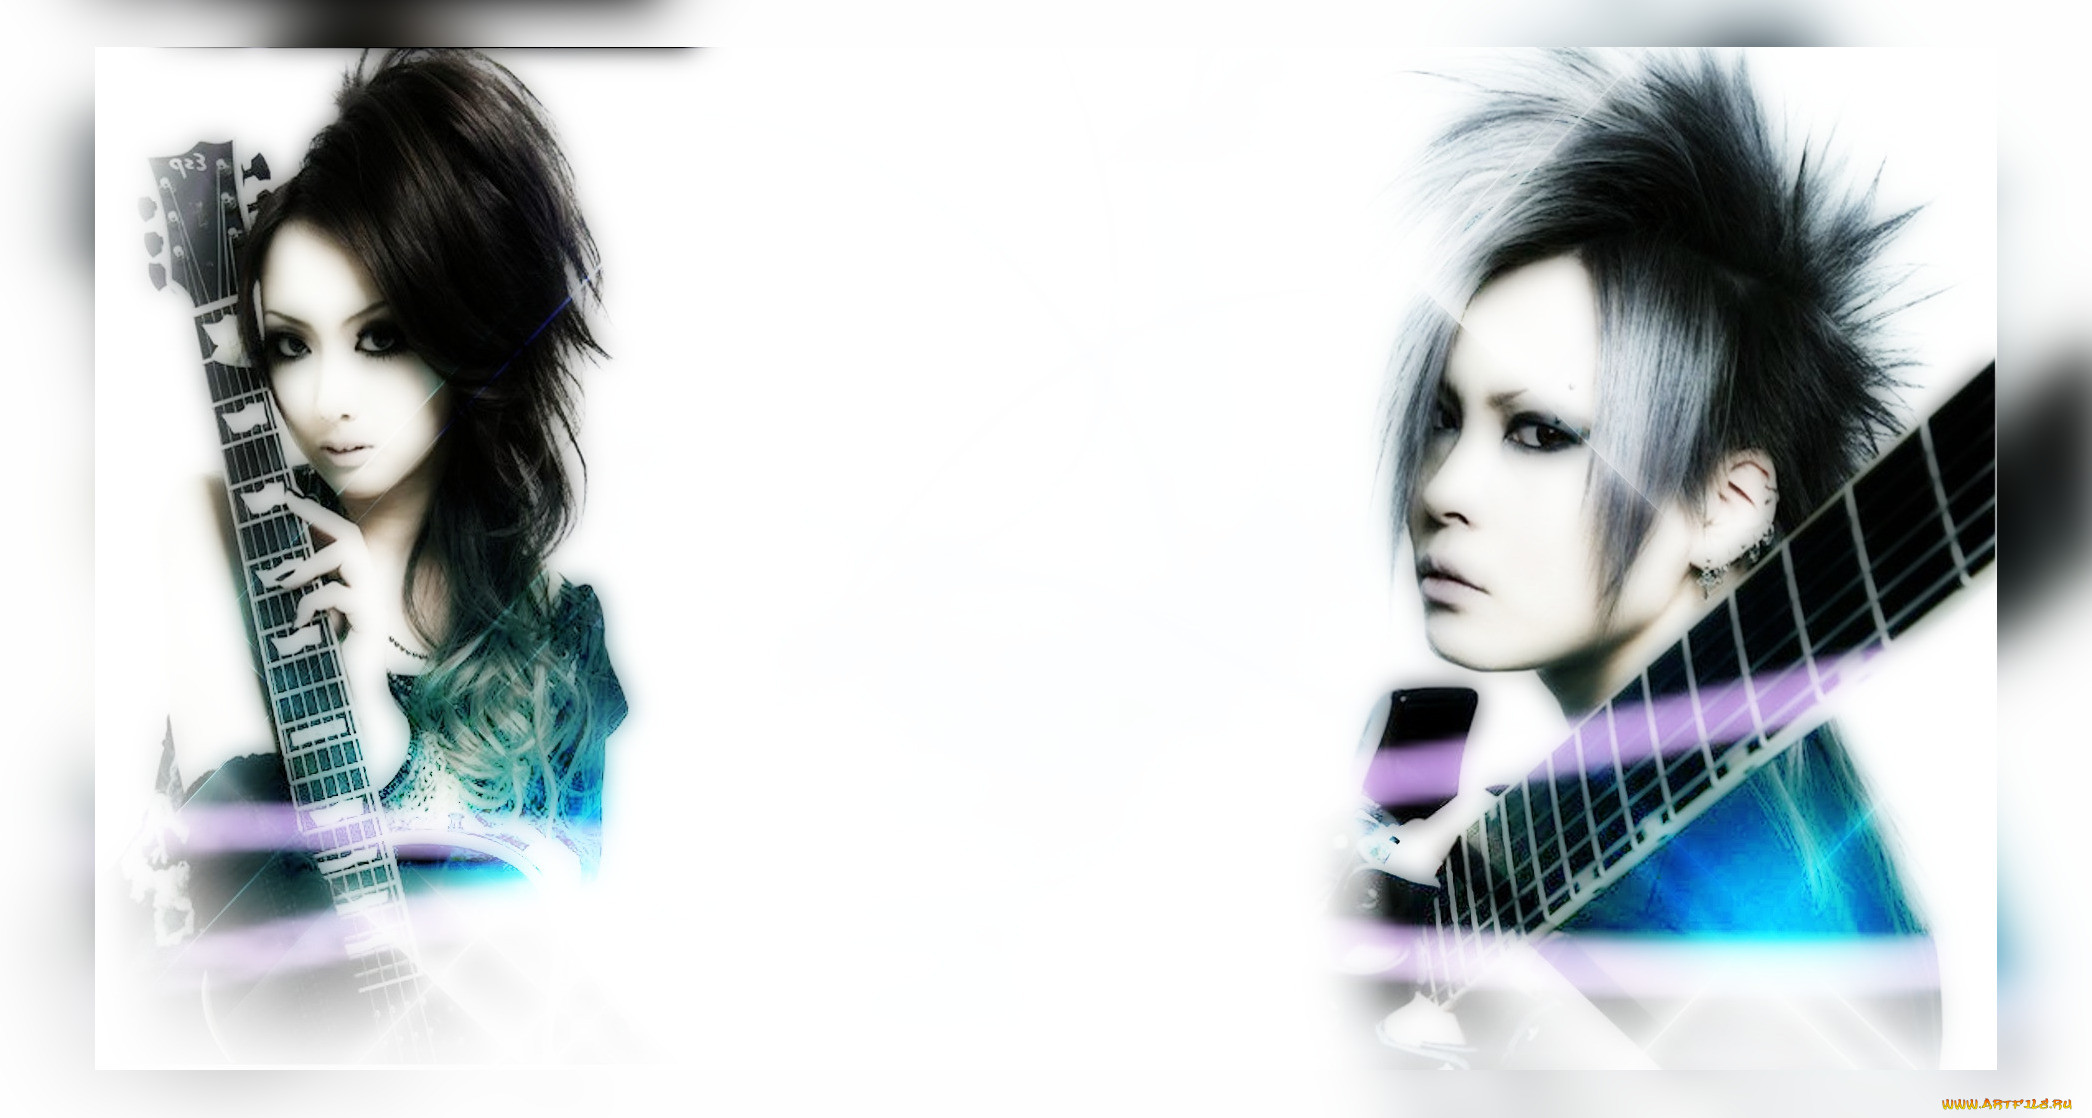 miko omi awesomeness, , exist trace, 